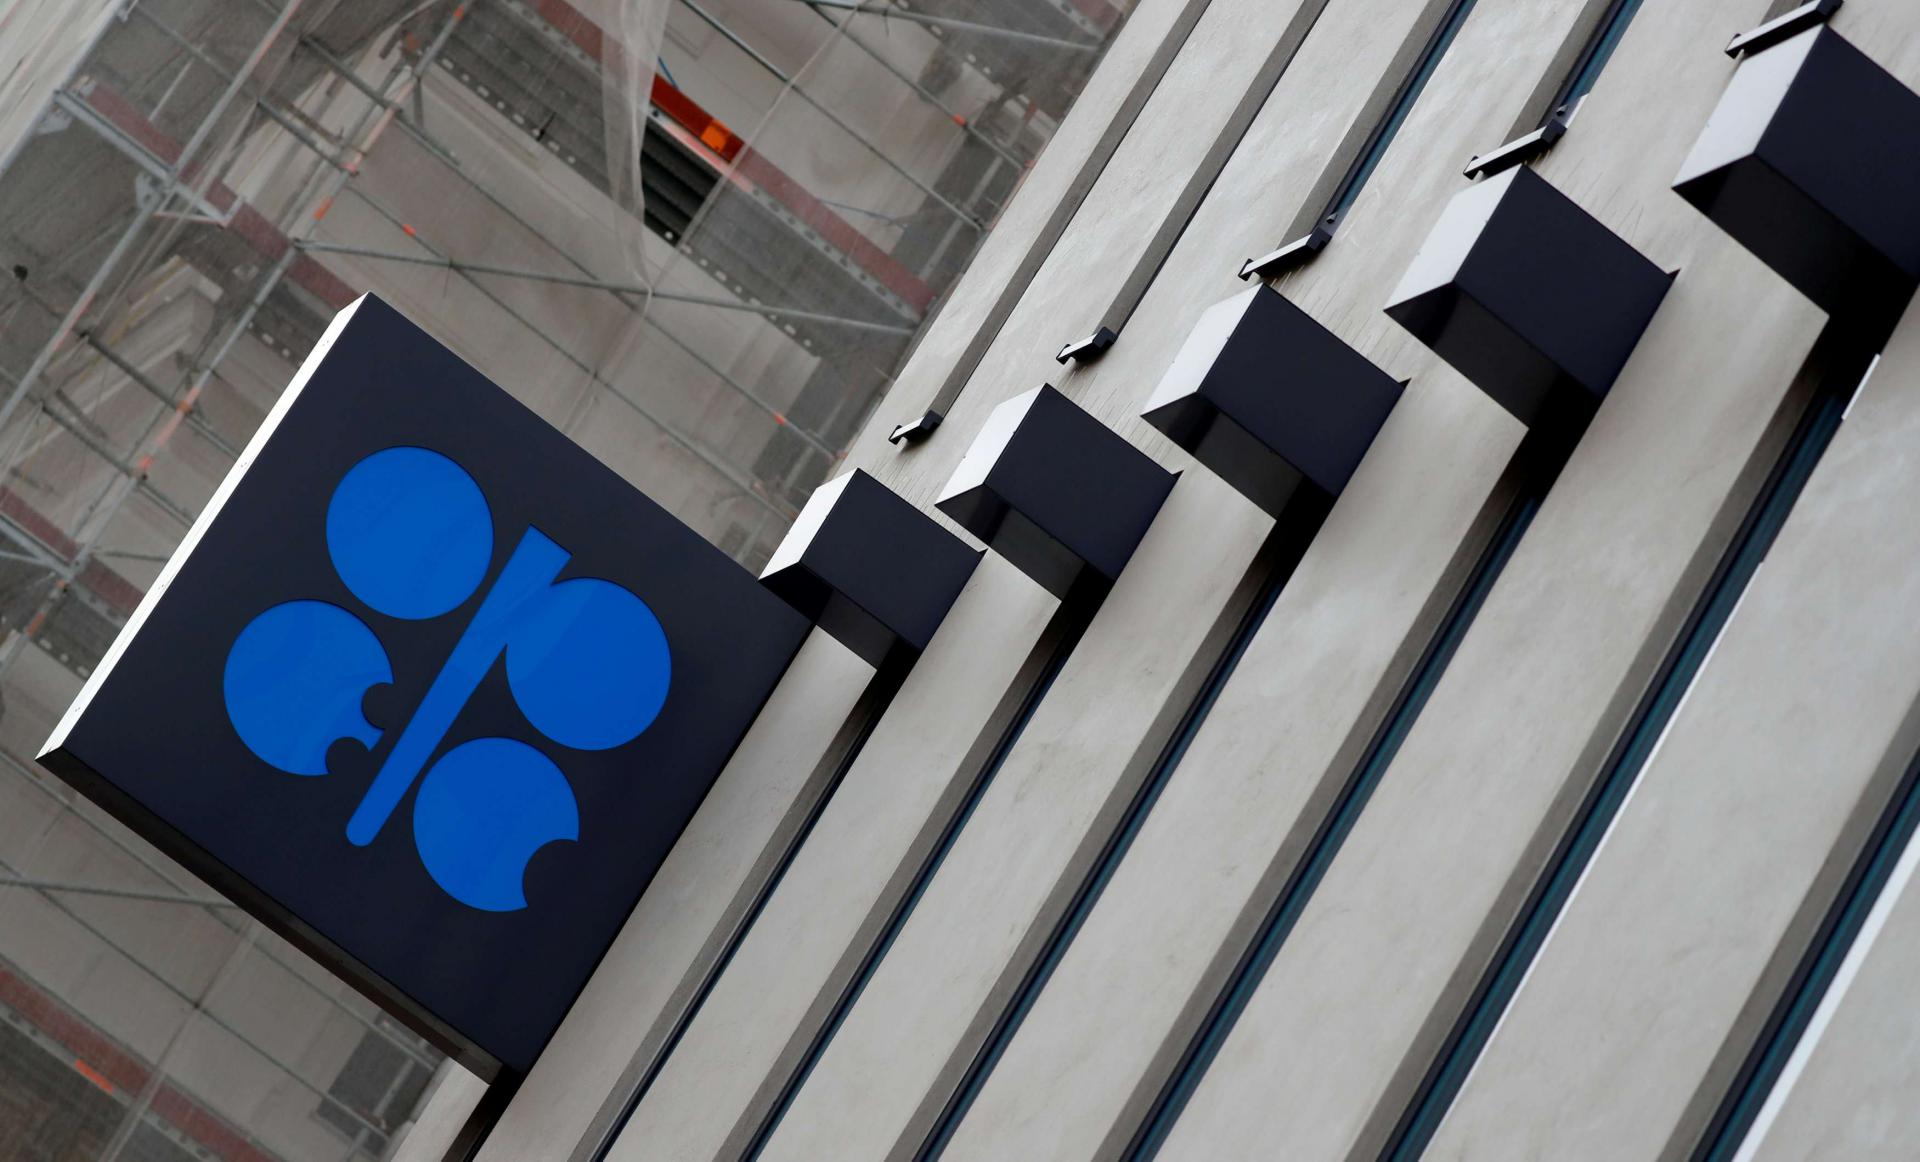 While remaining volatile, oil prices have rallied to just above $60 a barrel and jumped more than a dollar after the OPEC production update.